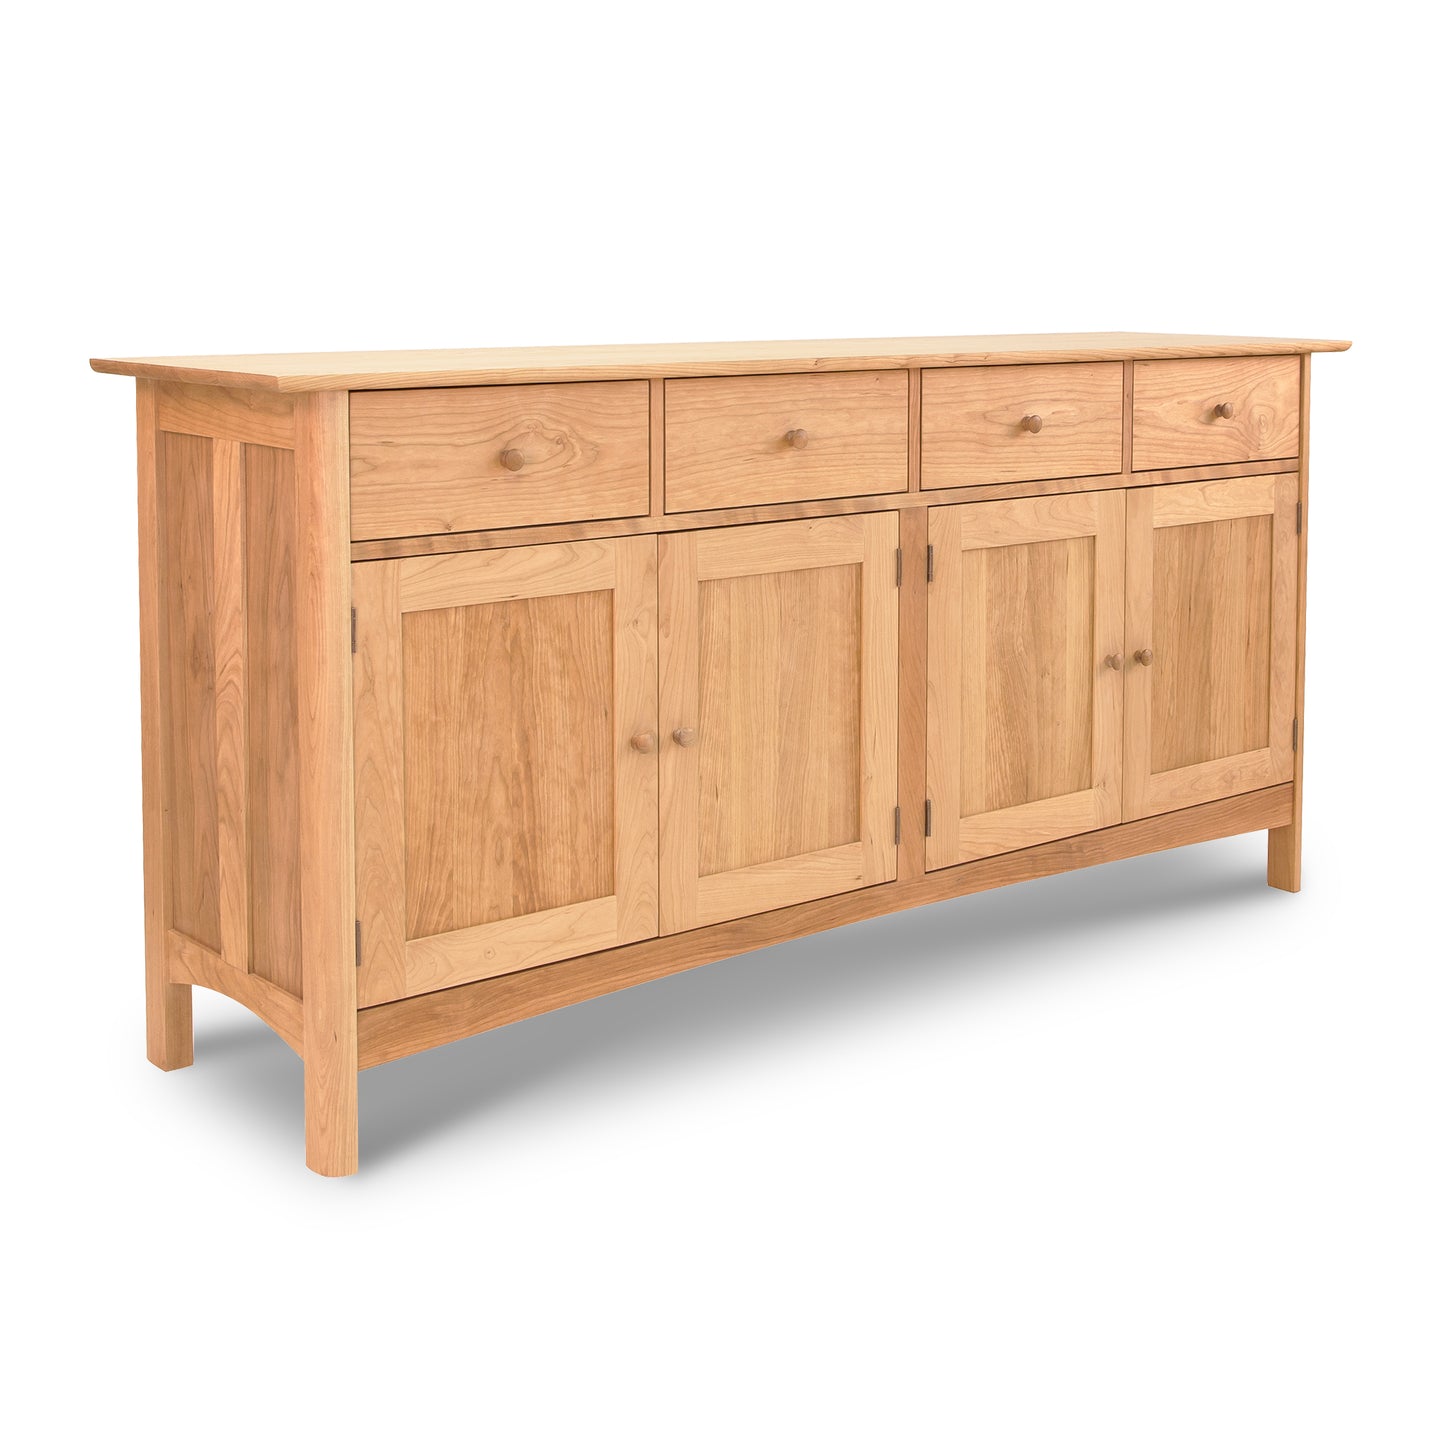 A solid wood Vermont Furniture Designs Heartwood Shaker Long Sideboard cabinet with three drawers and three doors on a white background, featuring an eco-friendly oil finish.